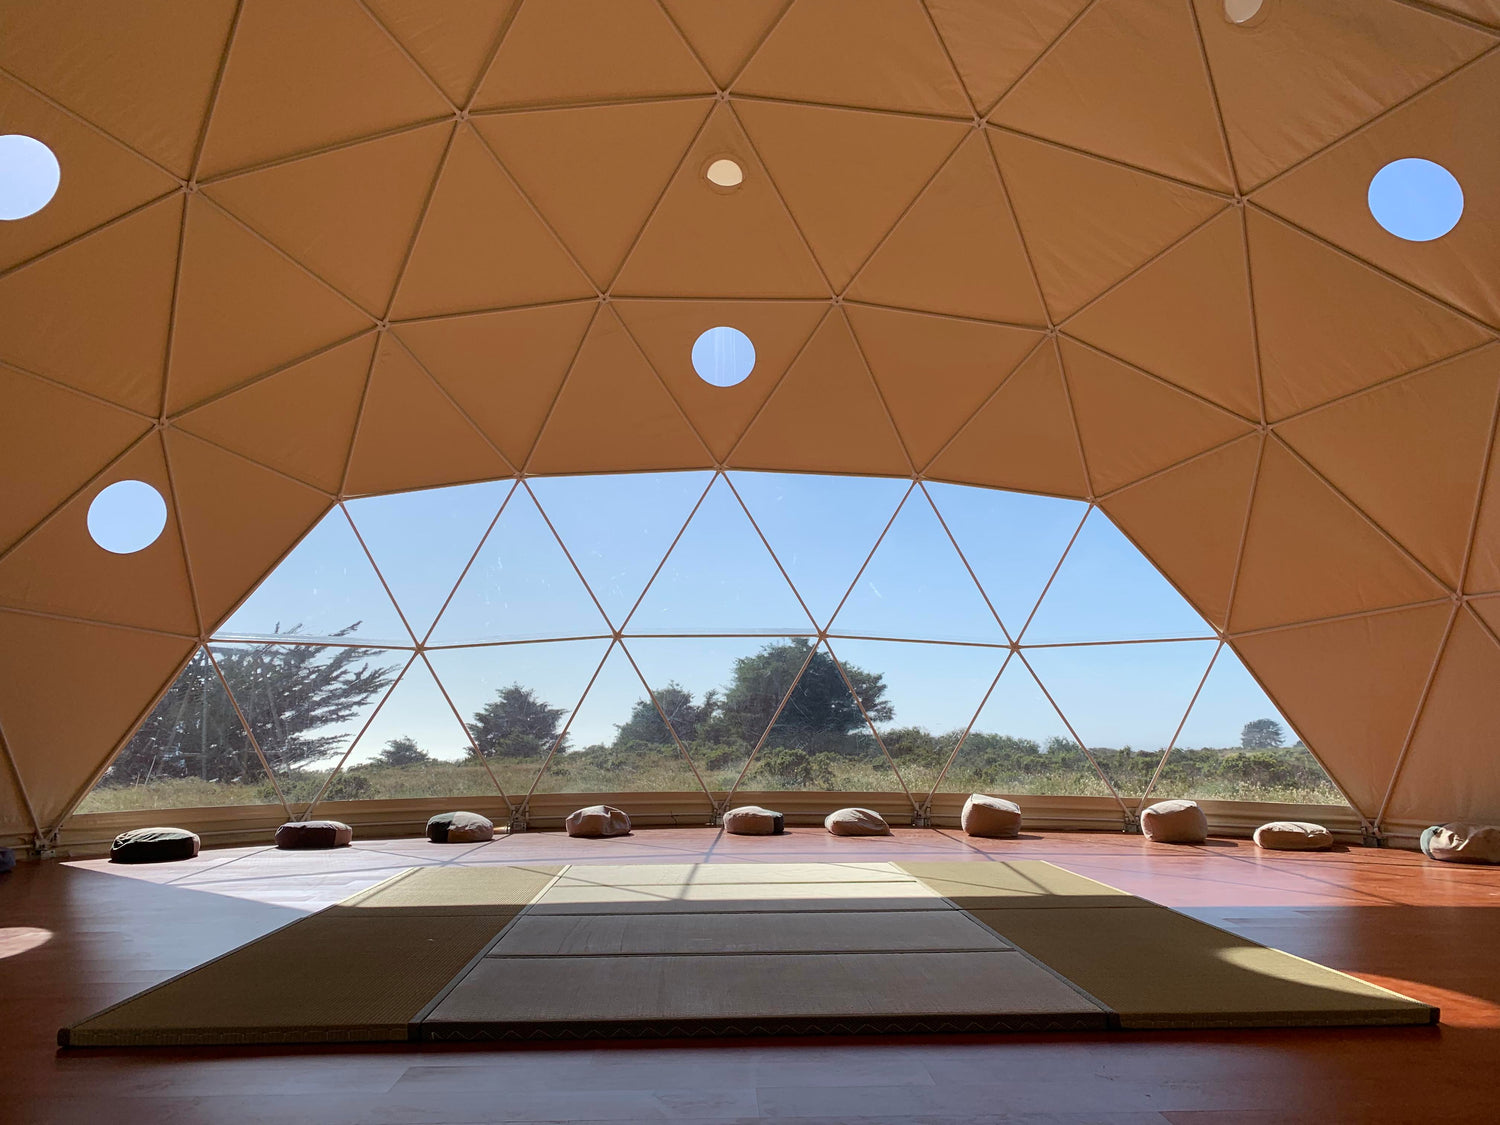 The Hot Yoga Dome - The ONE. The ONLY. The OG Hot Yoga Home Dome